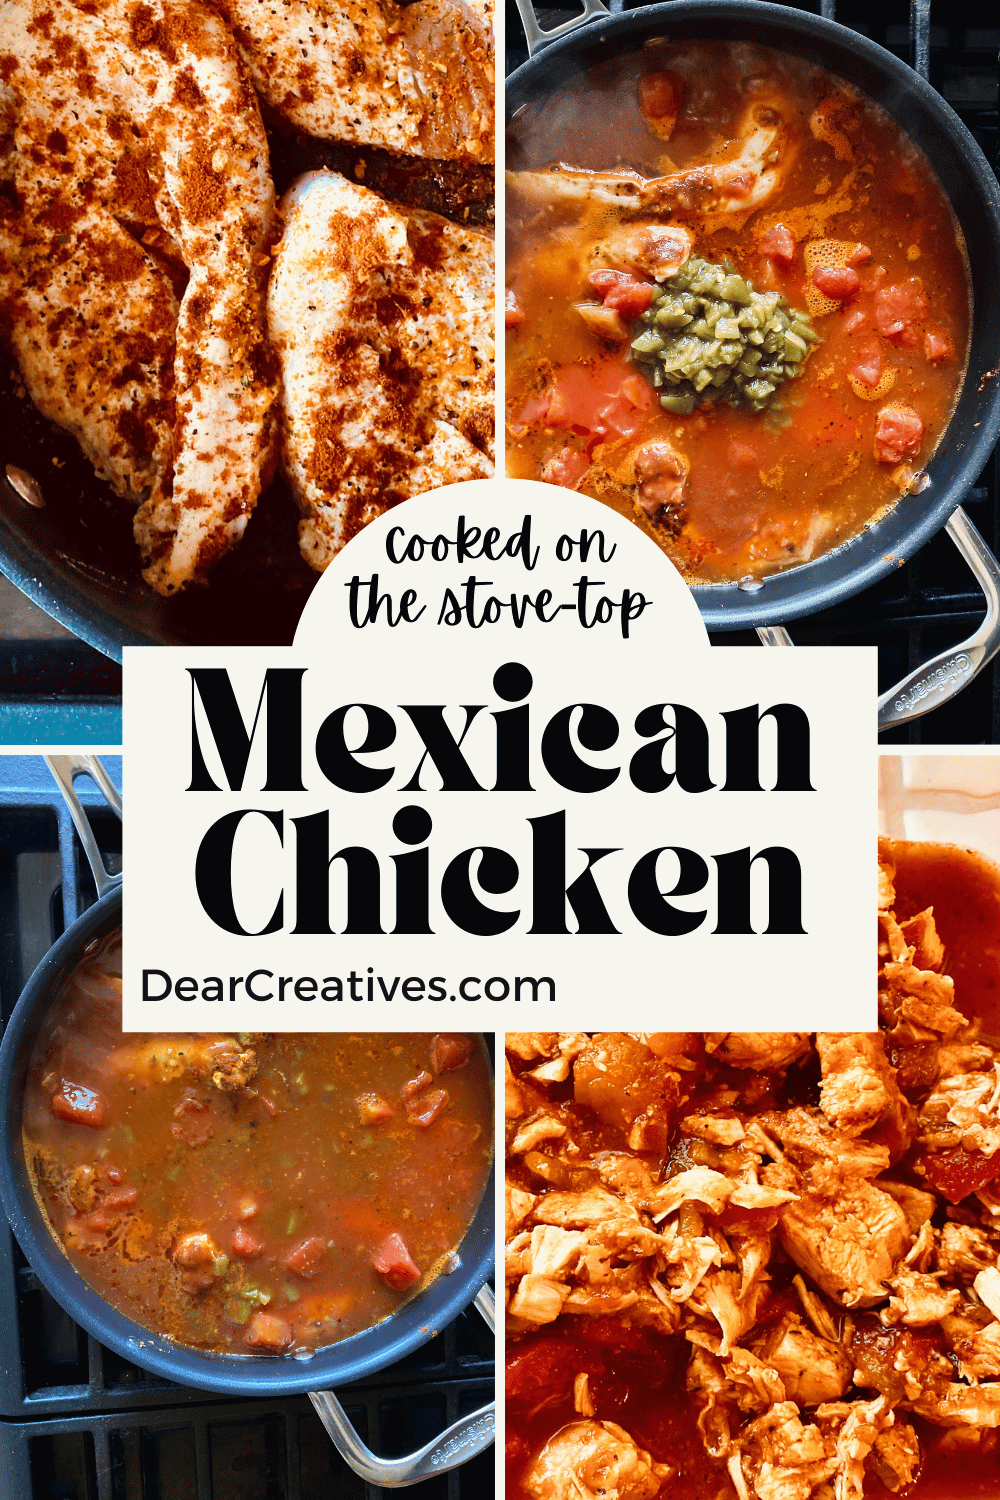 Mexican Chicken - Make Mexican Chicken on the stove -top. Chicken, diced tomatoes, spices, diced green chilies, salsa... Shred or cut up the chicken for various Mexican dinners made at home. Cook Mexican Chicken on the stove -top. Use the cooked chicken meat in tostadas, tacos, enchiladas, quesadillas... DearCreatives.com